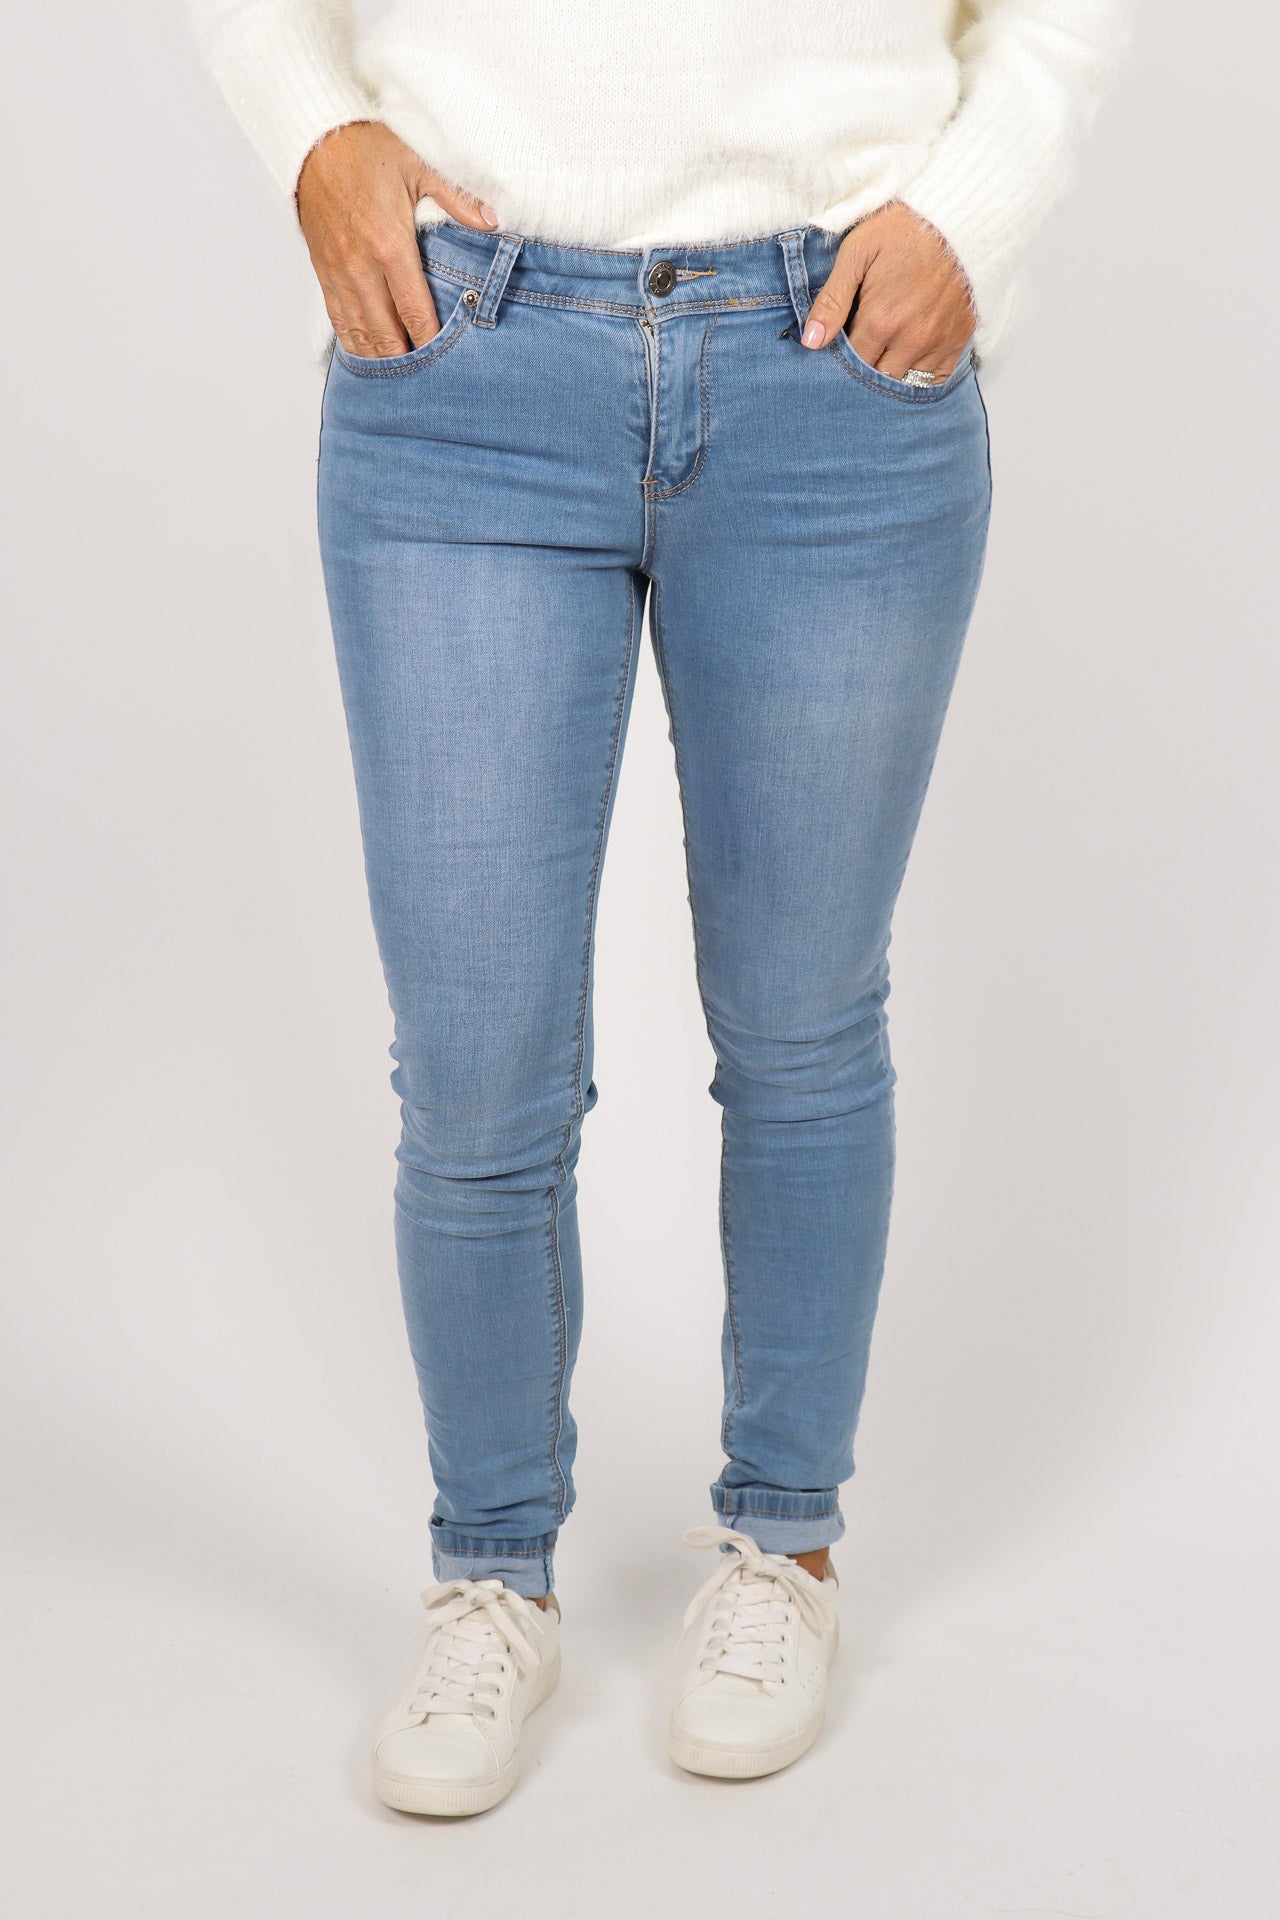 My Fit Stretch Denim Jeans in Light – Four Love Fashion